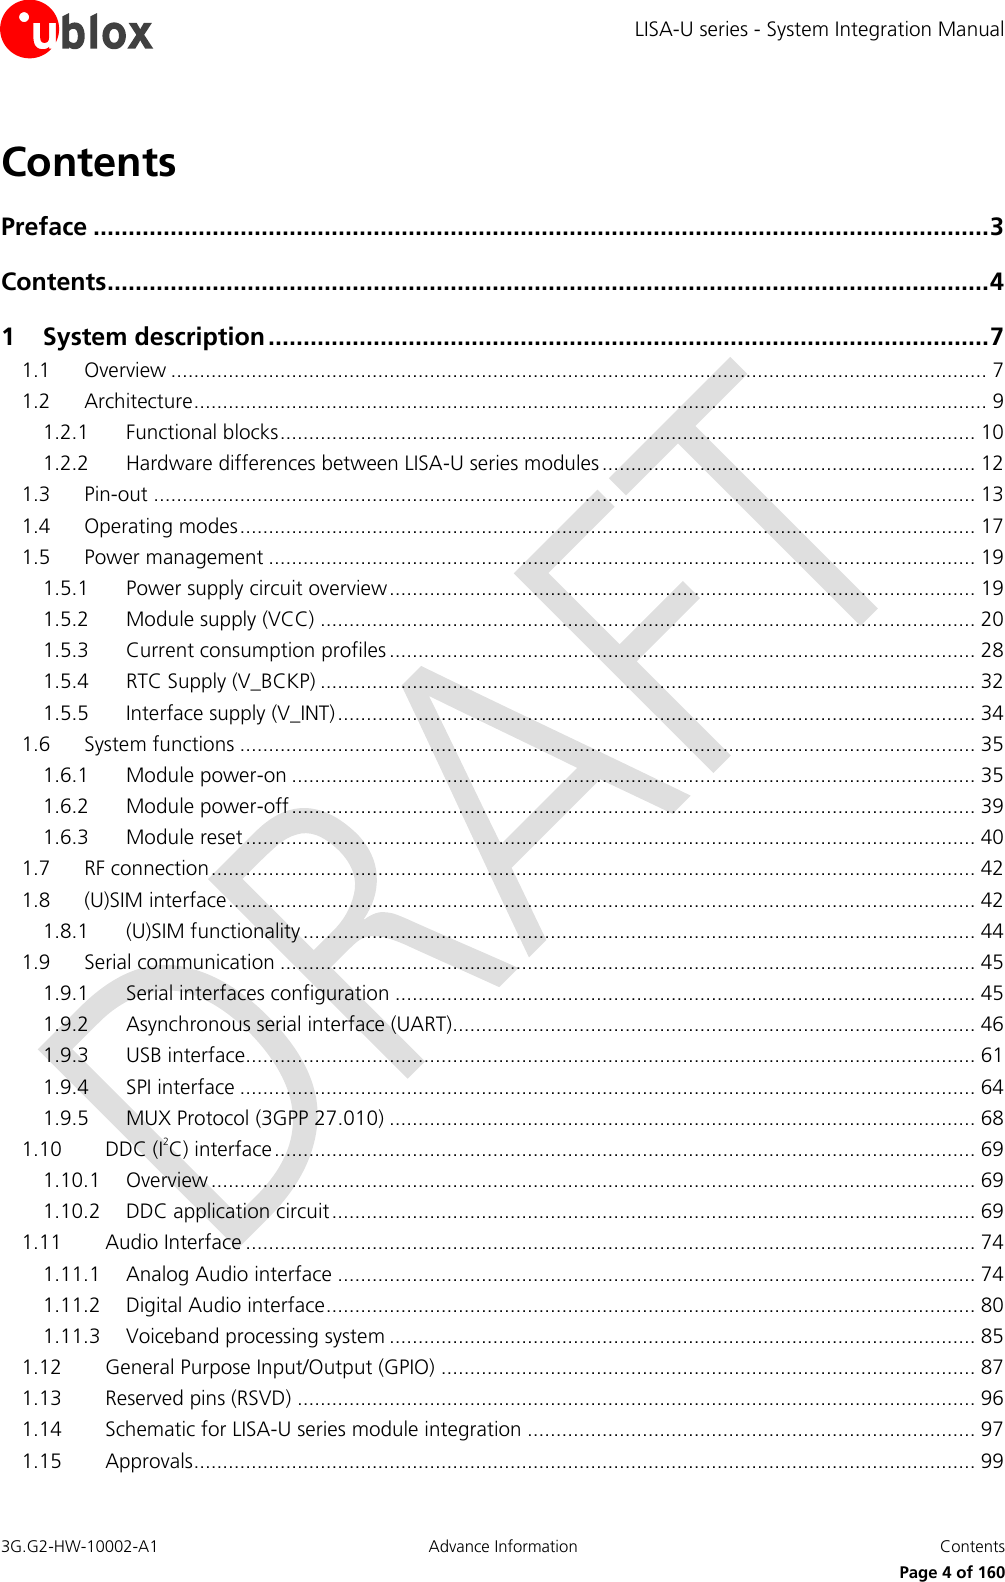 LISA-U series - System Integration Manual 3G.G2-HW-10002-A1  Advance Information  Contents      Page 4 of 160 Contents Preface ................................................................................................................................ 3 Contents .............................................................................................................................. 4 1 System description ....................................................................................................... 7 1.1 Overview .............................................................................................................................................. 7 1.2 Architecture .......................................................................................................................................... 9 1.2.1 Functional blocks ......................................................................................................................... 10 1.2.2 Hardware differences between LISA-U series modules ................................................................. 12 1.3 Pin-out ............................................................................................................................................... 13 1.4 Operating modes ................................................................................................................................ 17 1.5 Power management ........................................................................................................................... 19 1.5.1 Power supply circuit overview ...................................................................................................... 19 1.5.2 Module supply (VCC) .................................................................................................................. 20 1.5.3 Current consumption profiles ...................................................................................................... 28 1.5.4 RTC Supply (V_BCKP) .................................................................................................................. 32 1.5.5 Interface supply (V_INT) ............................................................................................................... 34 1.6 System functions ................................................................................................................................ 35 1.6.1 Module power-on ....................................................................................................................... 35 1.6.2 Module power-off ....................................................................................................................... 39 1.6.3 Module reset ............................................................................................................................... 40 1.7 RF connection ..................................................................................................................................... 42 1.8 (U)SIM interface .................................................................................................................................. 42 1.8.1 (U)SIM functionality ..................................................................................................................... 44 1.9 Serial communication ......................................................................................................................... 45 1.9.1 Serial interfaces configuration ..................................................................................................... 45 1.9.2 Asynchronous serial interface (UART)........................................................................................... 46 1.9.3 USB interface............................................................................................................................... 61 1.9.4 SPI interface ................................................................................................................................ 64 1.9.5 MUX Protocol (3GPP 27.010) ...................................................................................................... 68 1.10 DDC (I2C) interface .......................................................................................................................... 69 1.10.1 Overview ..................................................................................................................................... 69 1.10.2 DDC application circuit ................................................................................................................ 69 1.11 Audio Interface ............................................................................................................................... 74 1.11.1 Analog Audio interface ............................................................................................................... 74 1.11.2 Digital Audio interface ................................................................................................................. 80 1.11.3 Voiceband processing system ...................................................................................................... 85 1.12 General Purpose Input/Output (GPIO) ............................................................................................. 87 1.13 Reserved pins (RSVD) ...................................................................................................................... 96 1.14 Schematic for LISA-U series module integration .............................................................................. 97 1.15 Approvals ........................................................................................................................................ 99 